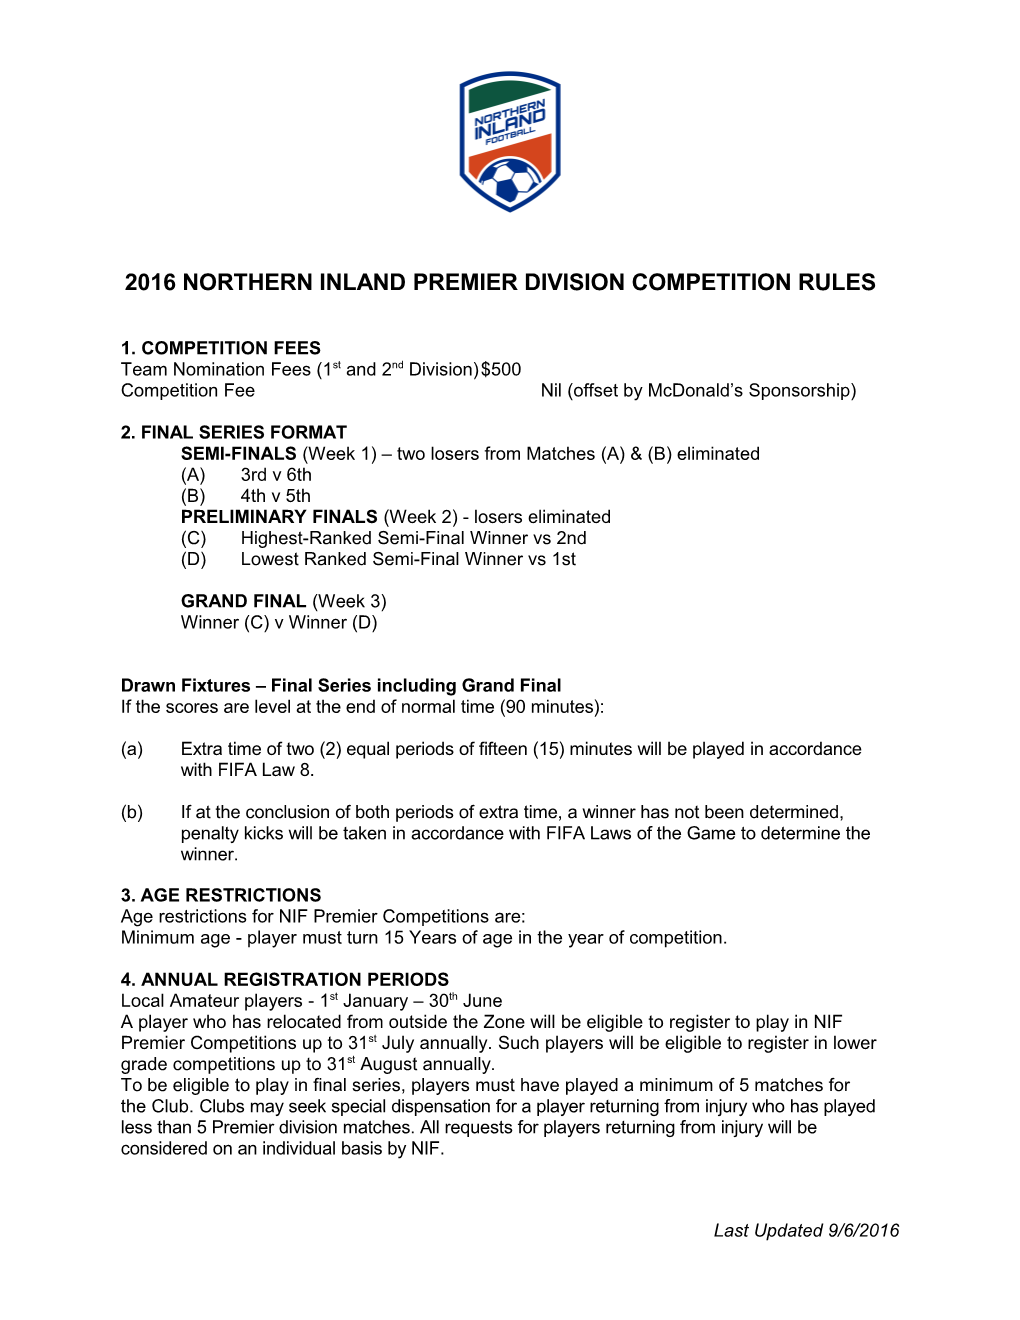 2016Northern Inland Premier Divisioncompetition Rules